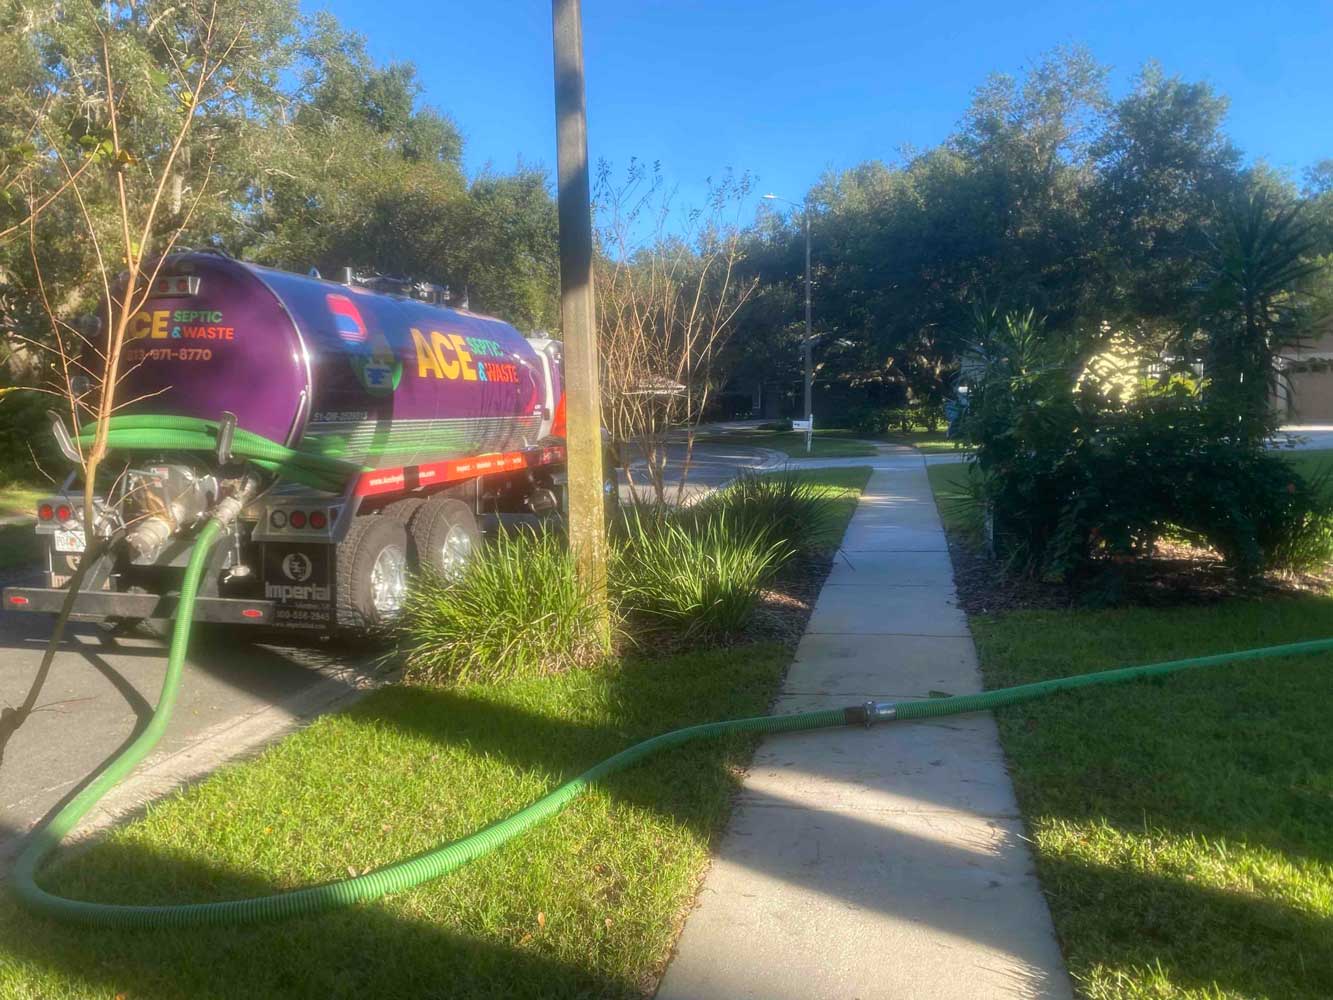 A septic truck with an extended hose across pavement leading towards a septic system.